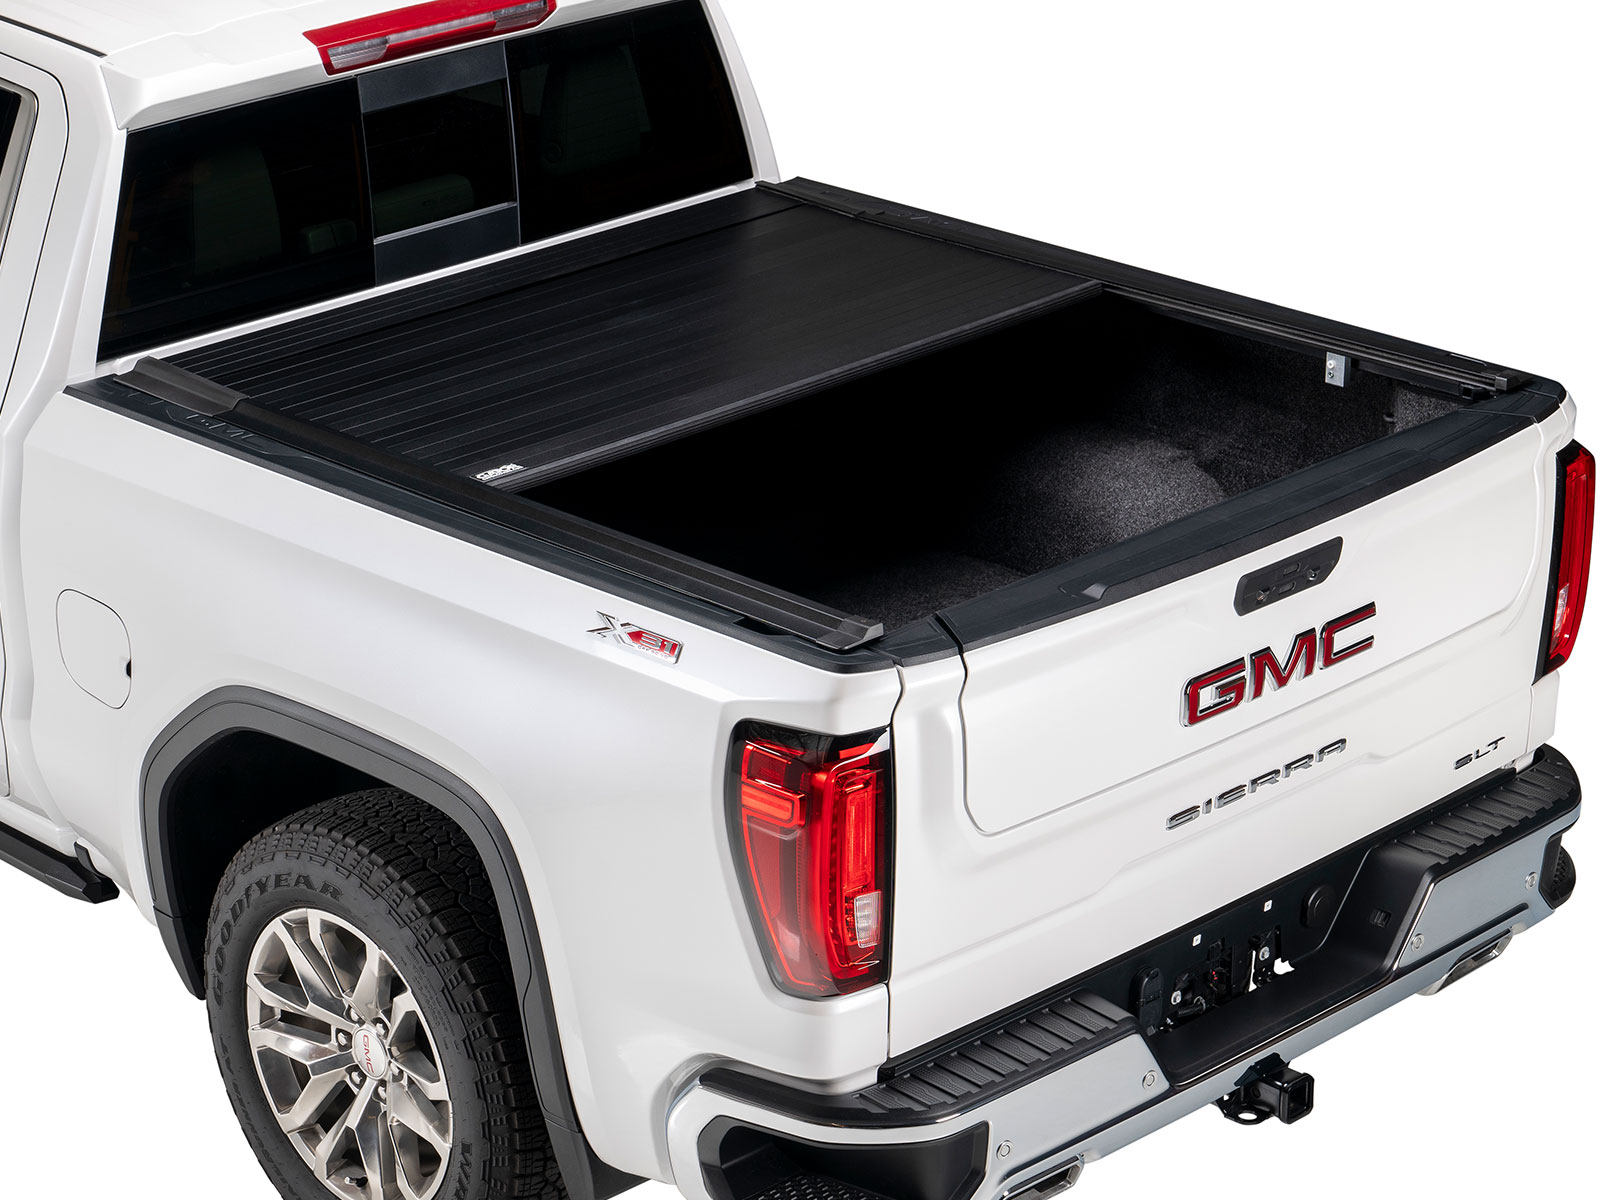 2007 Toyota Tundra Bed Covers & Tonneau Covers | RealTruck